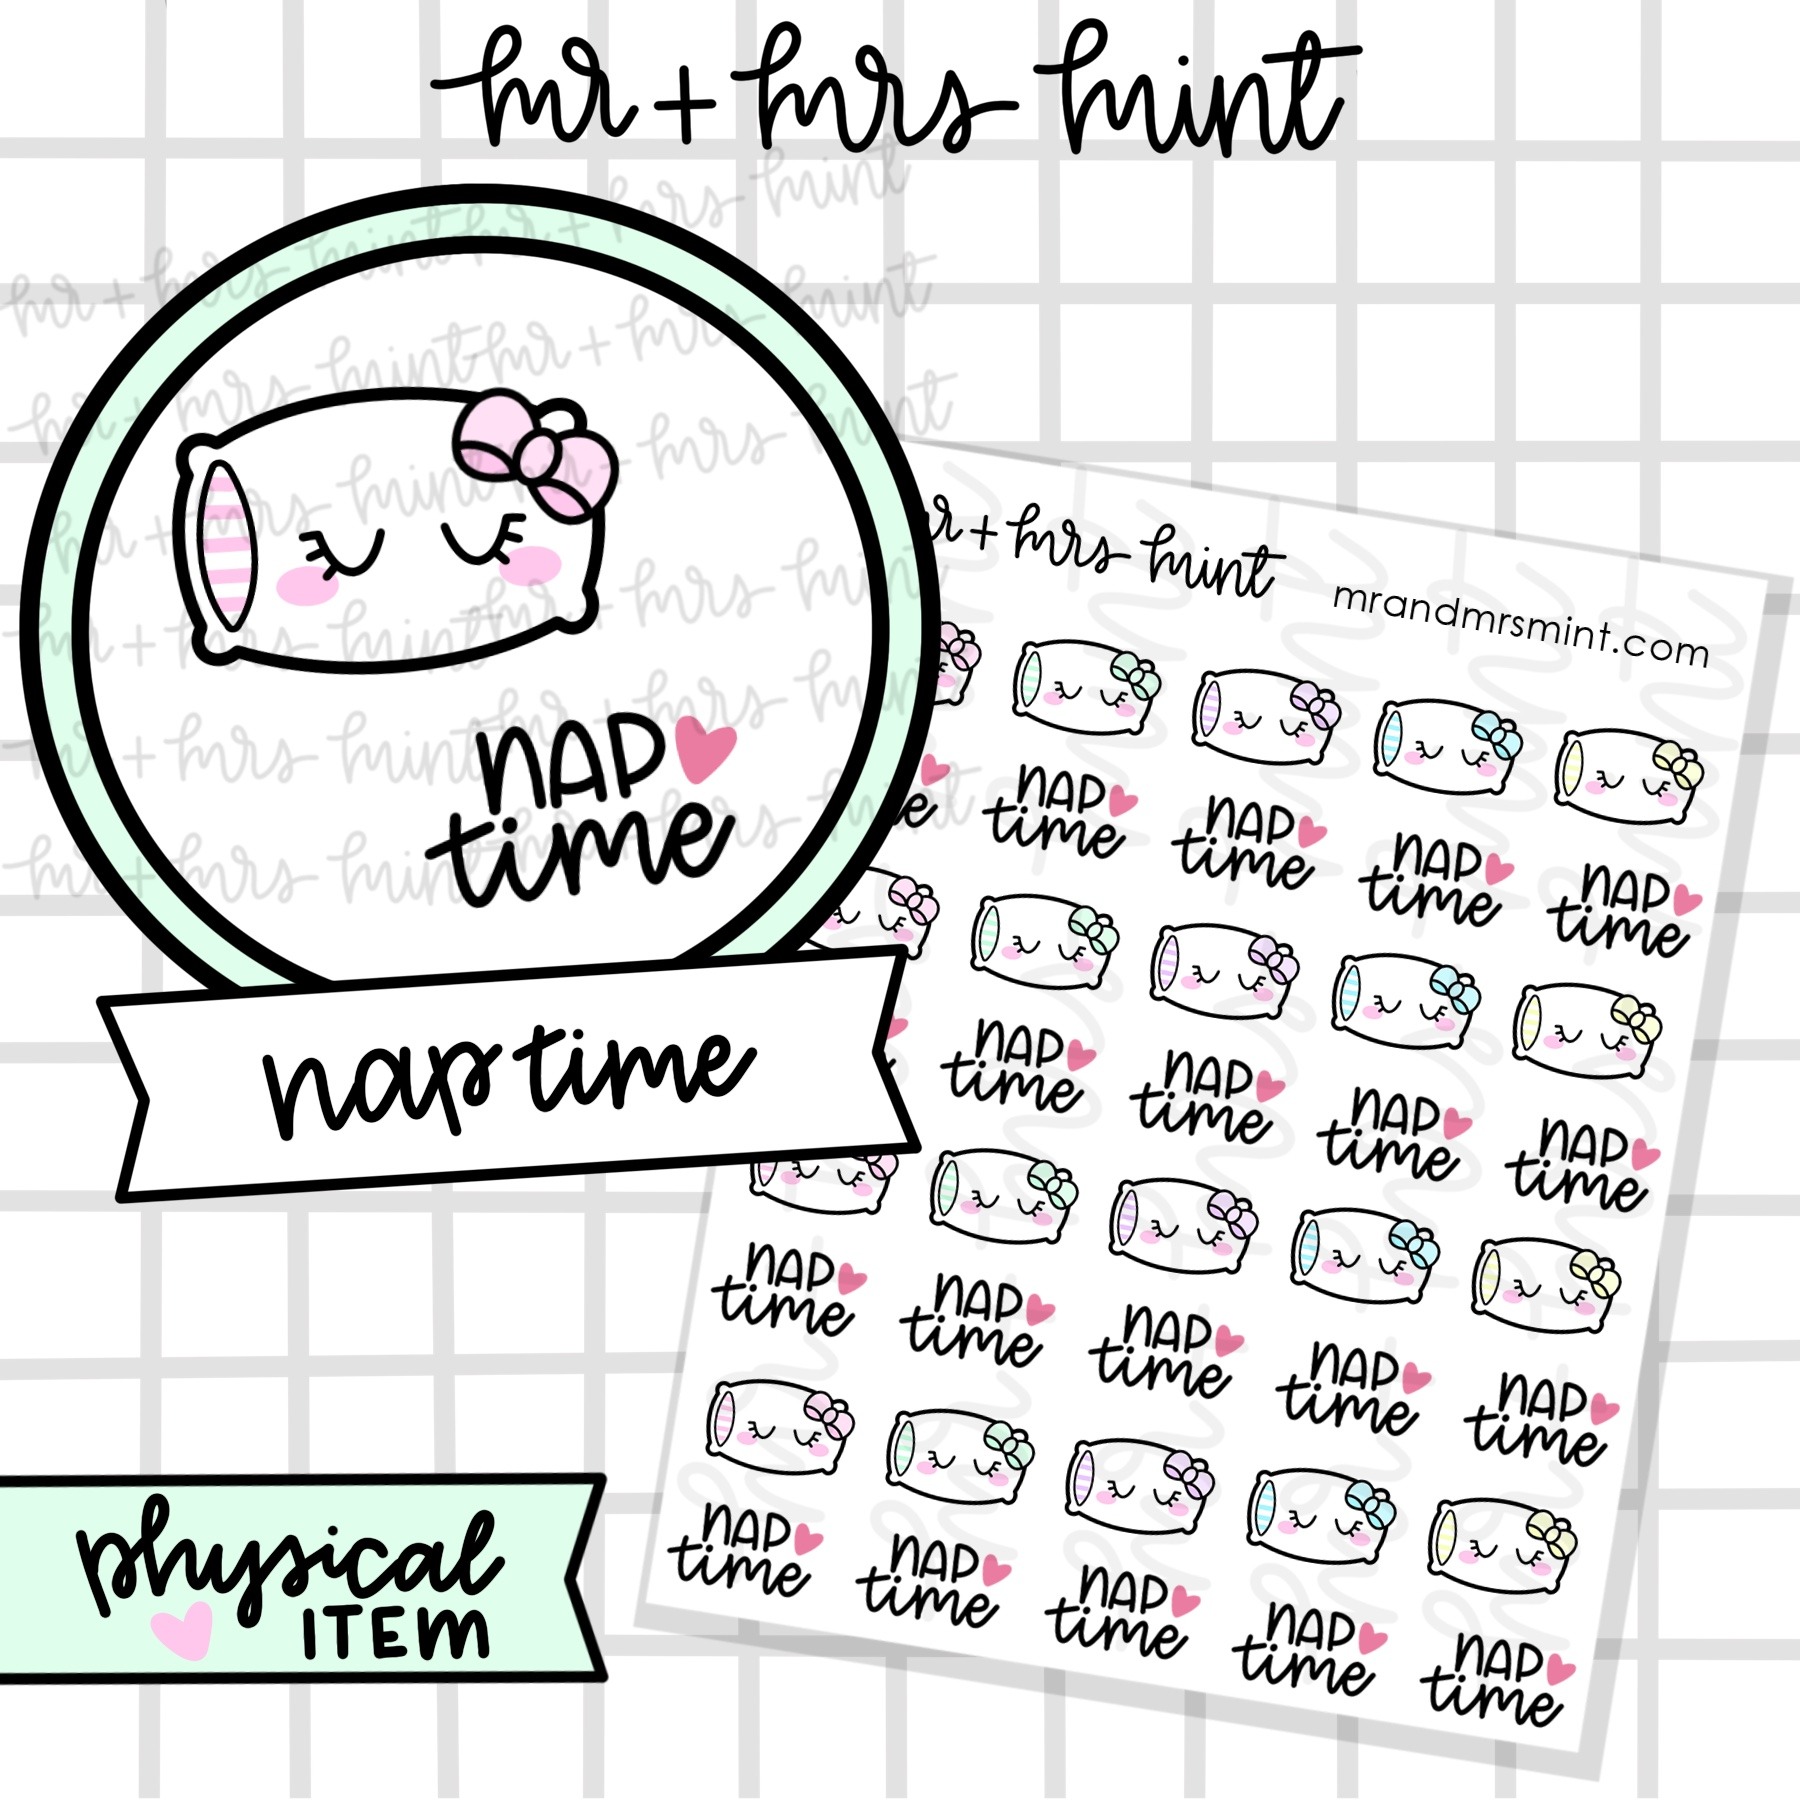 Period Tracking Planner Stickers / Appointments Reminder Stickers